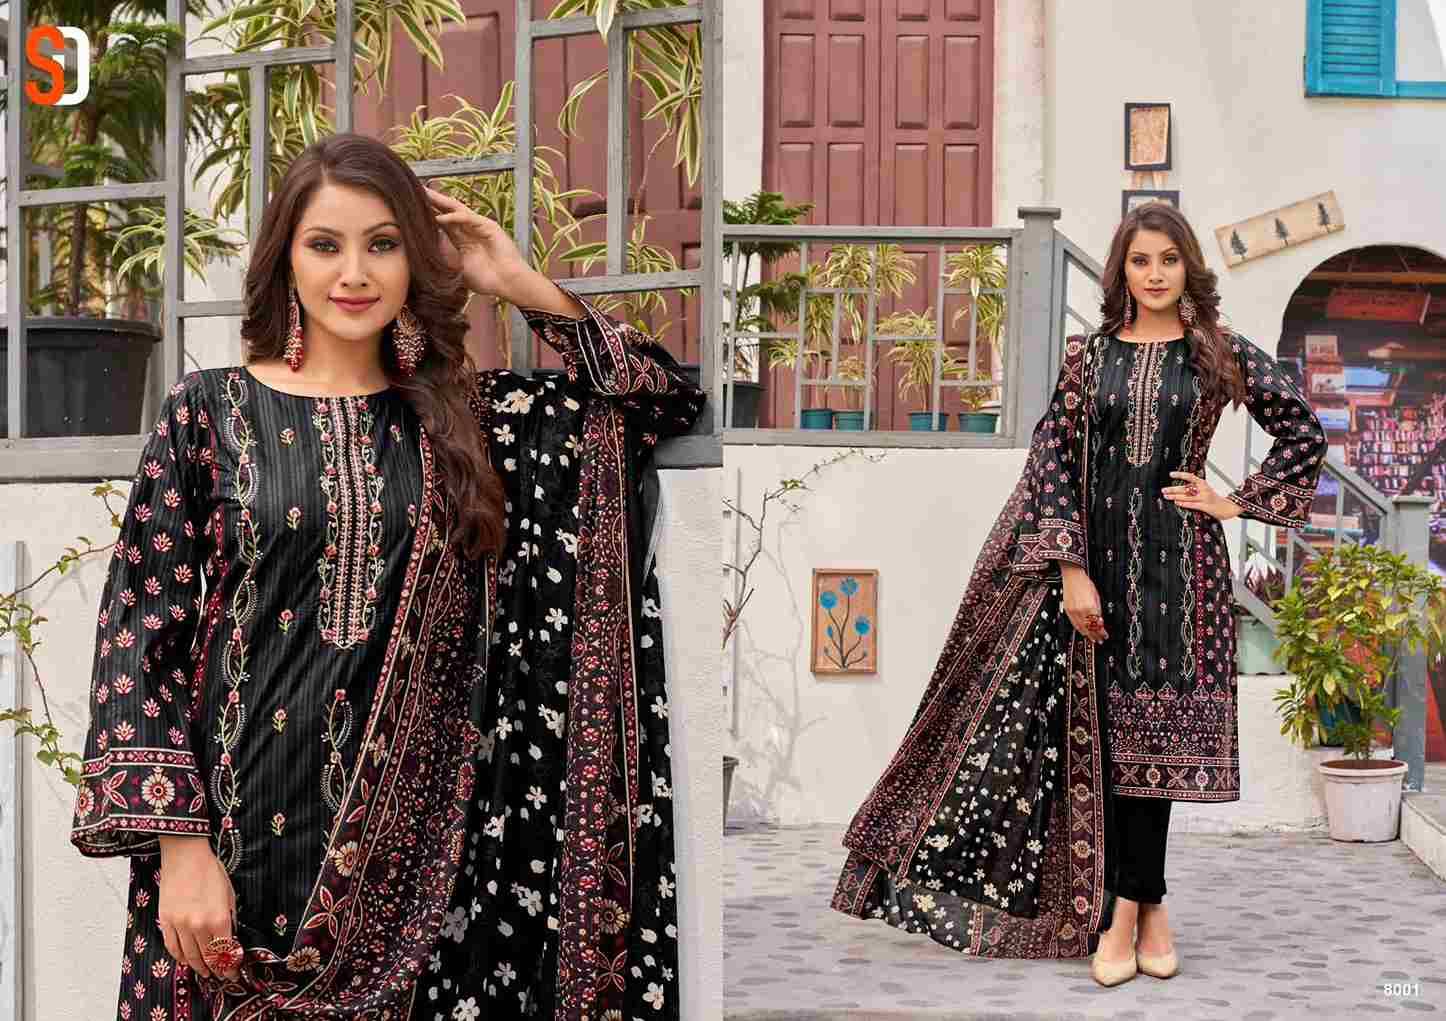 Bin Saeed Lawn Collection Vol-8 By Shraddha Designer 8001 To 8006 Series Designer Pakistani Suits Beautiful Fancy Stylish Colorful Party Wear & Occasional Wear Pure Cotton Print With Embroidery Dresses At Wholesale Price